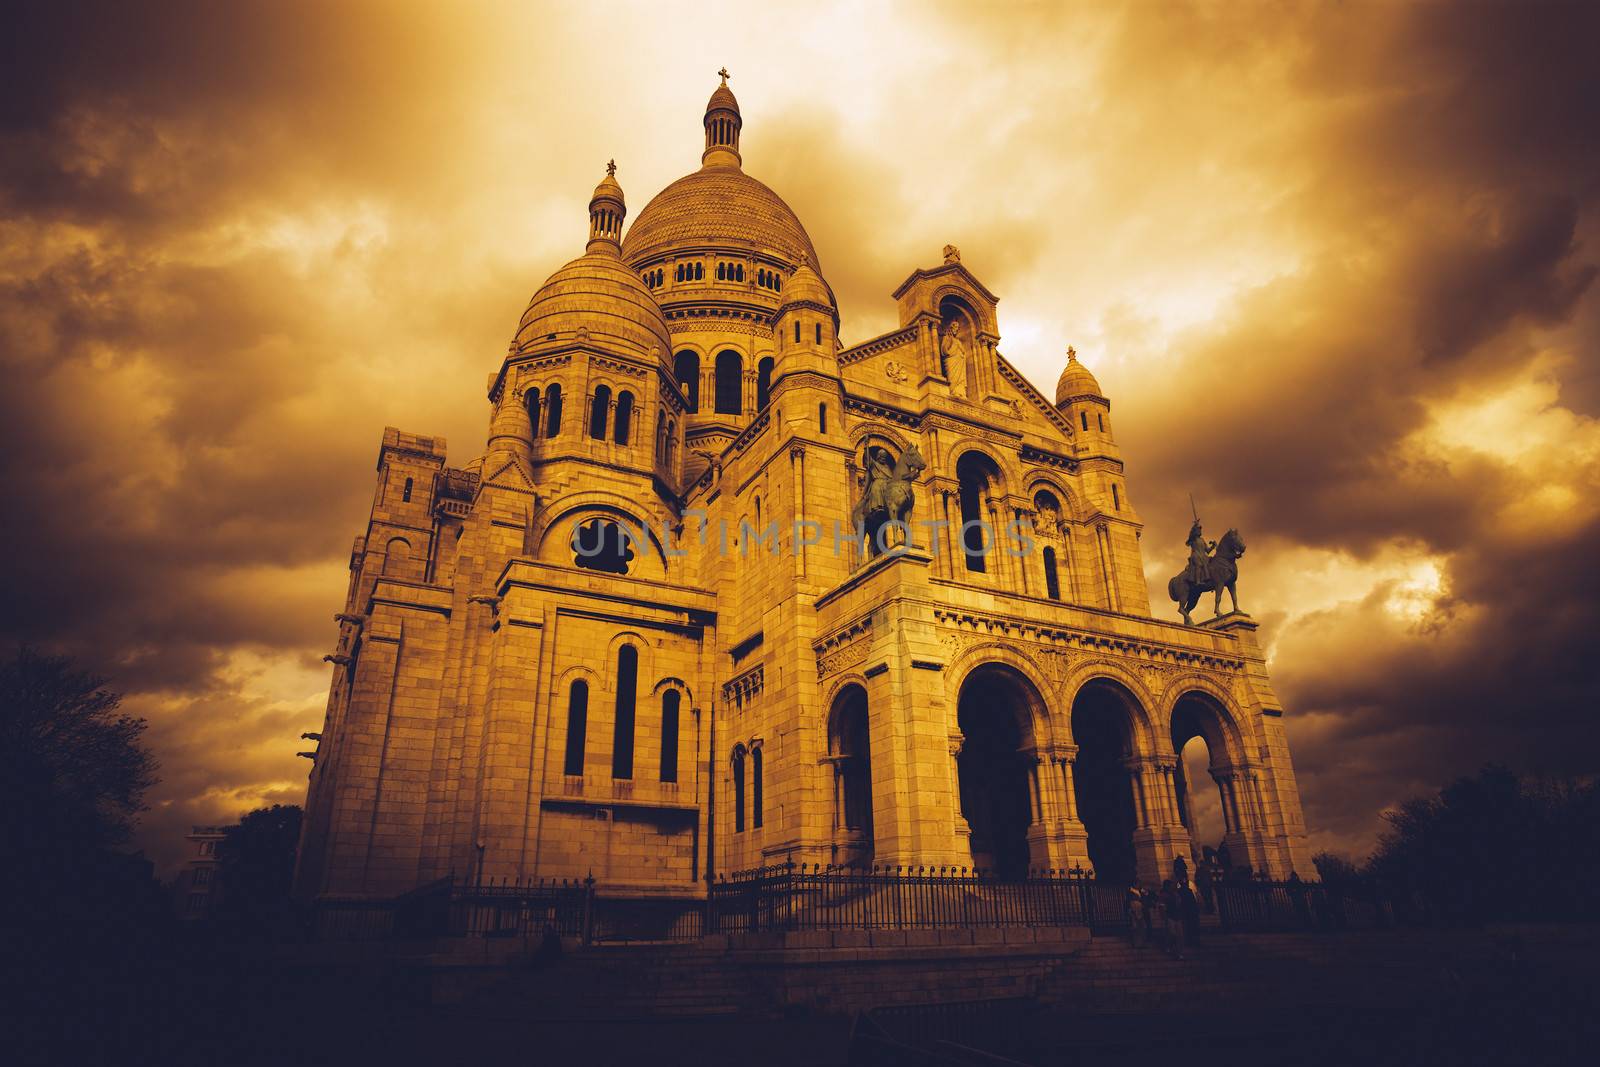 Sacre Coeur in Paris, France, as storm clouds gather. Heavily filtered image for mood and atmosphere.